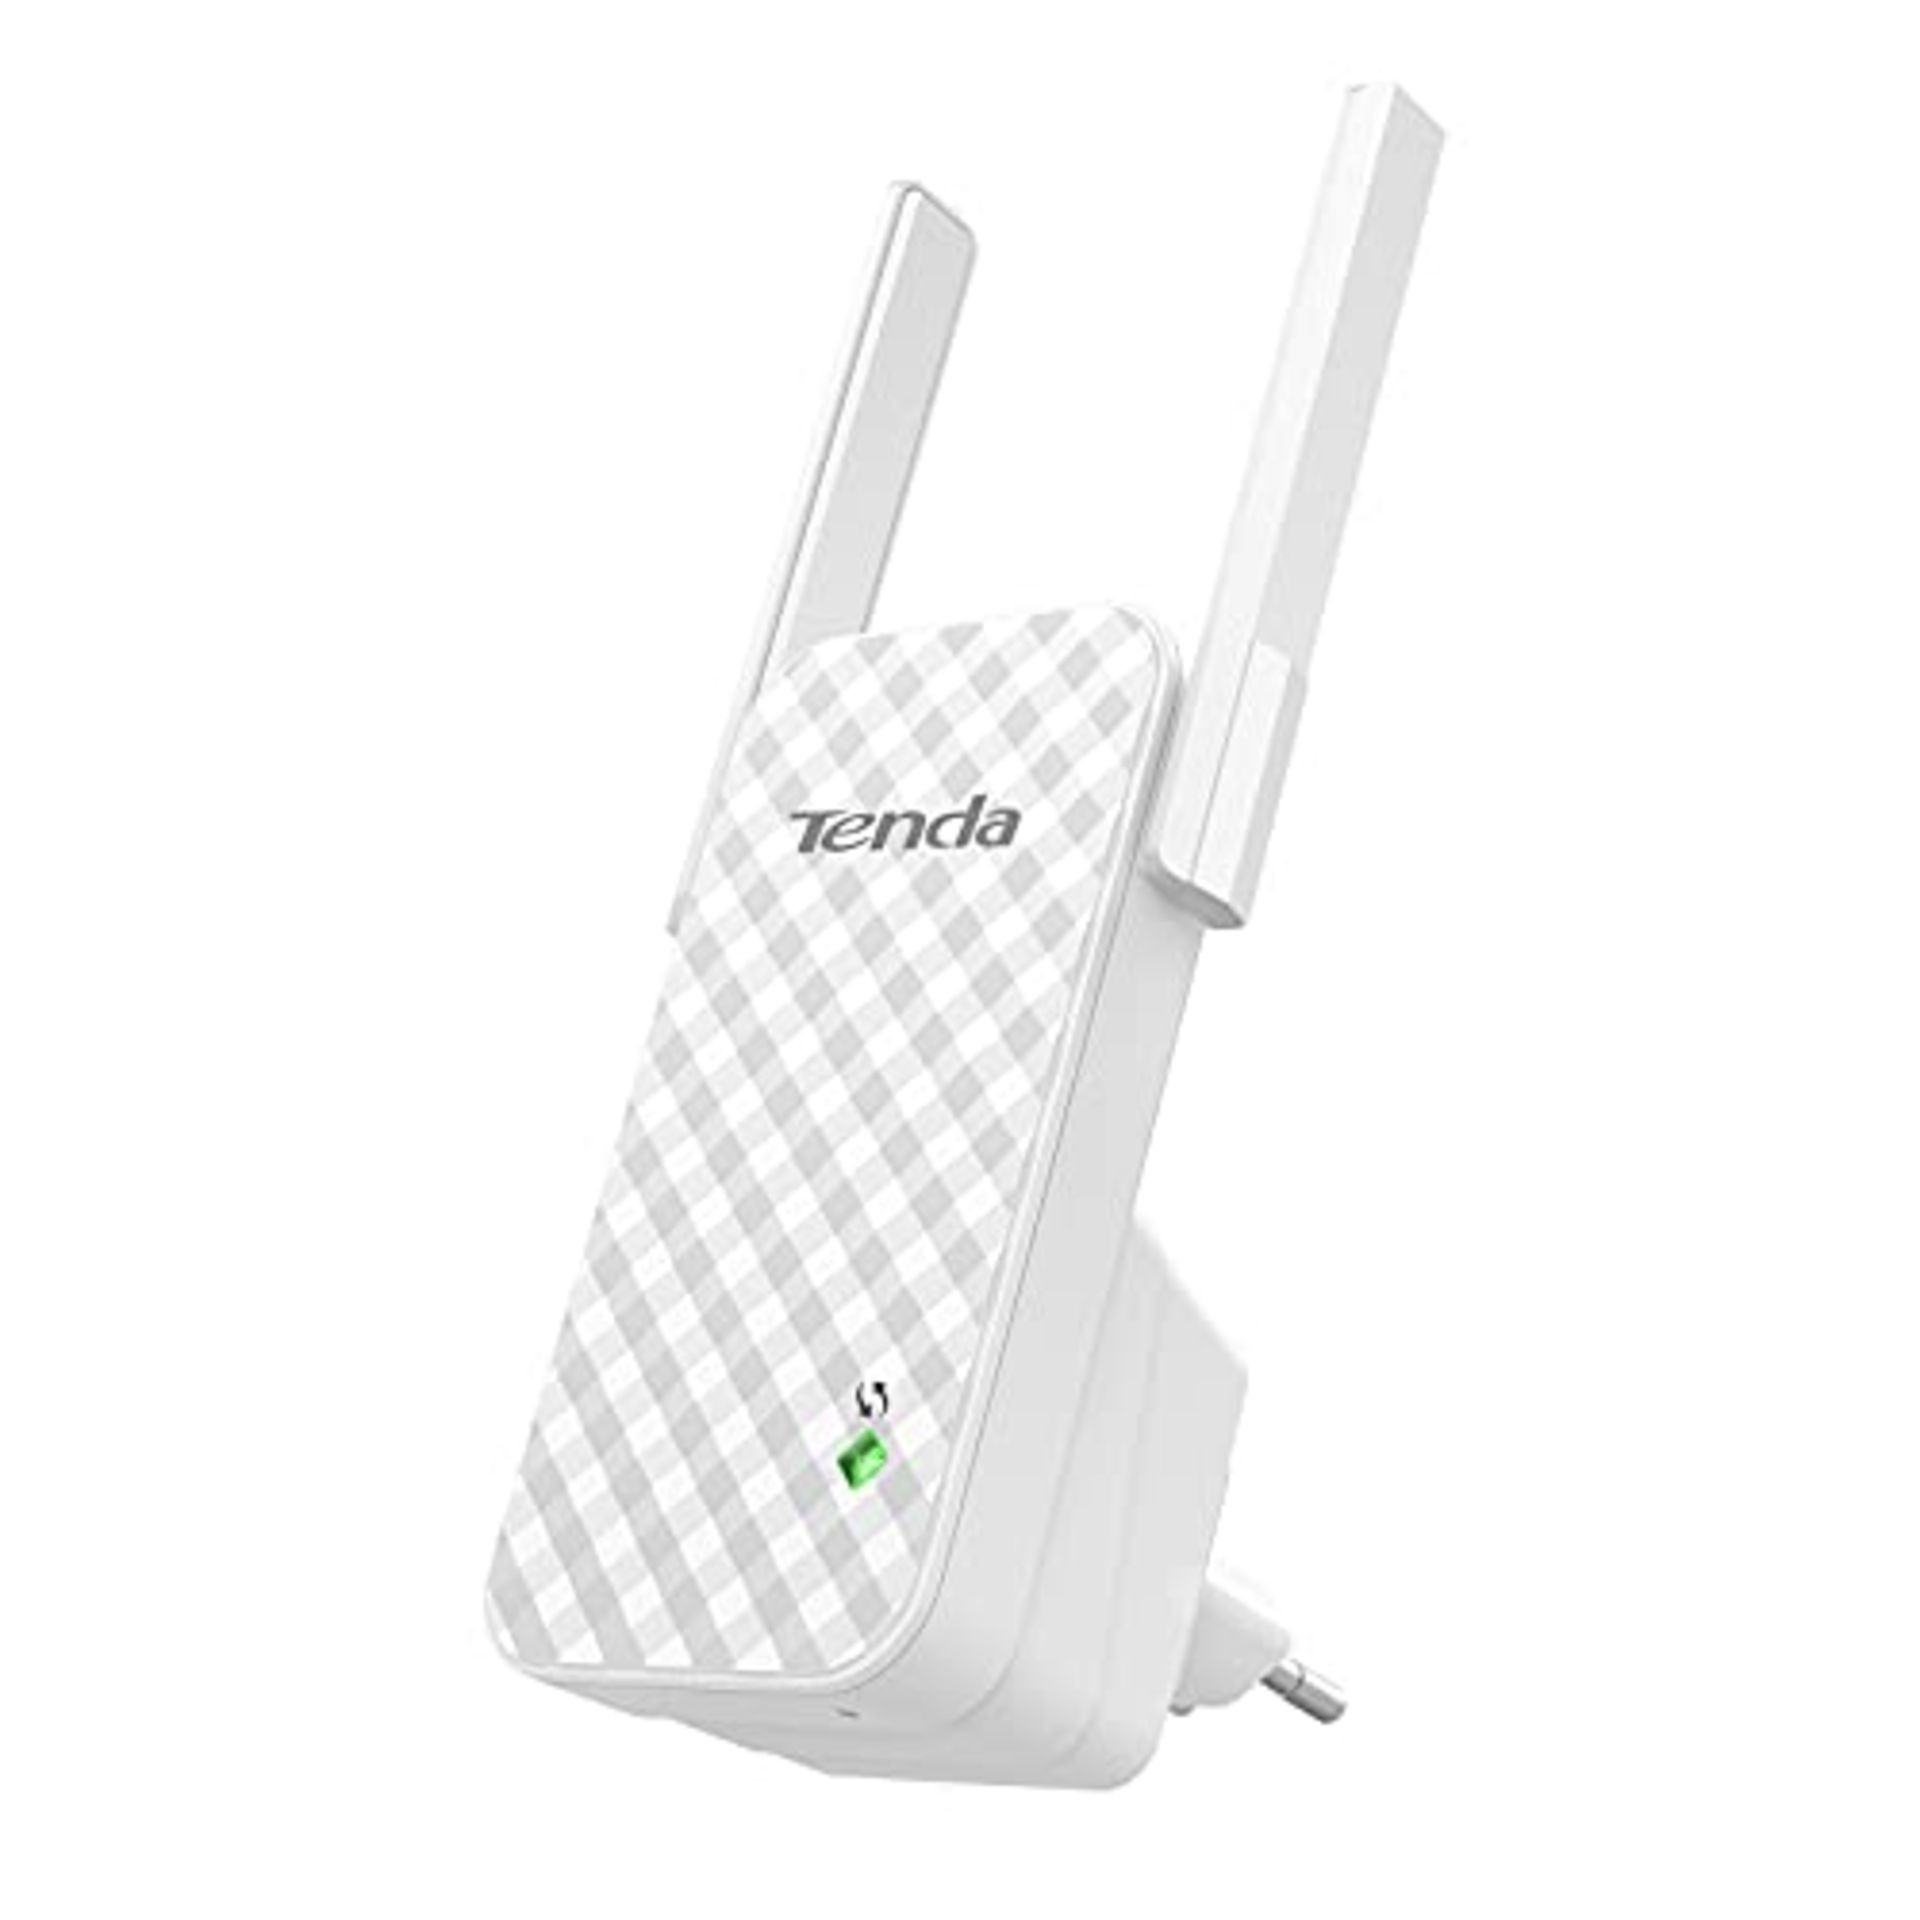 Tenda WLAN Repeater WLAN Amplifier WiFi Repeater (N300 2.4GHz: 300 Mbps), 2 * 3dBi Ext